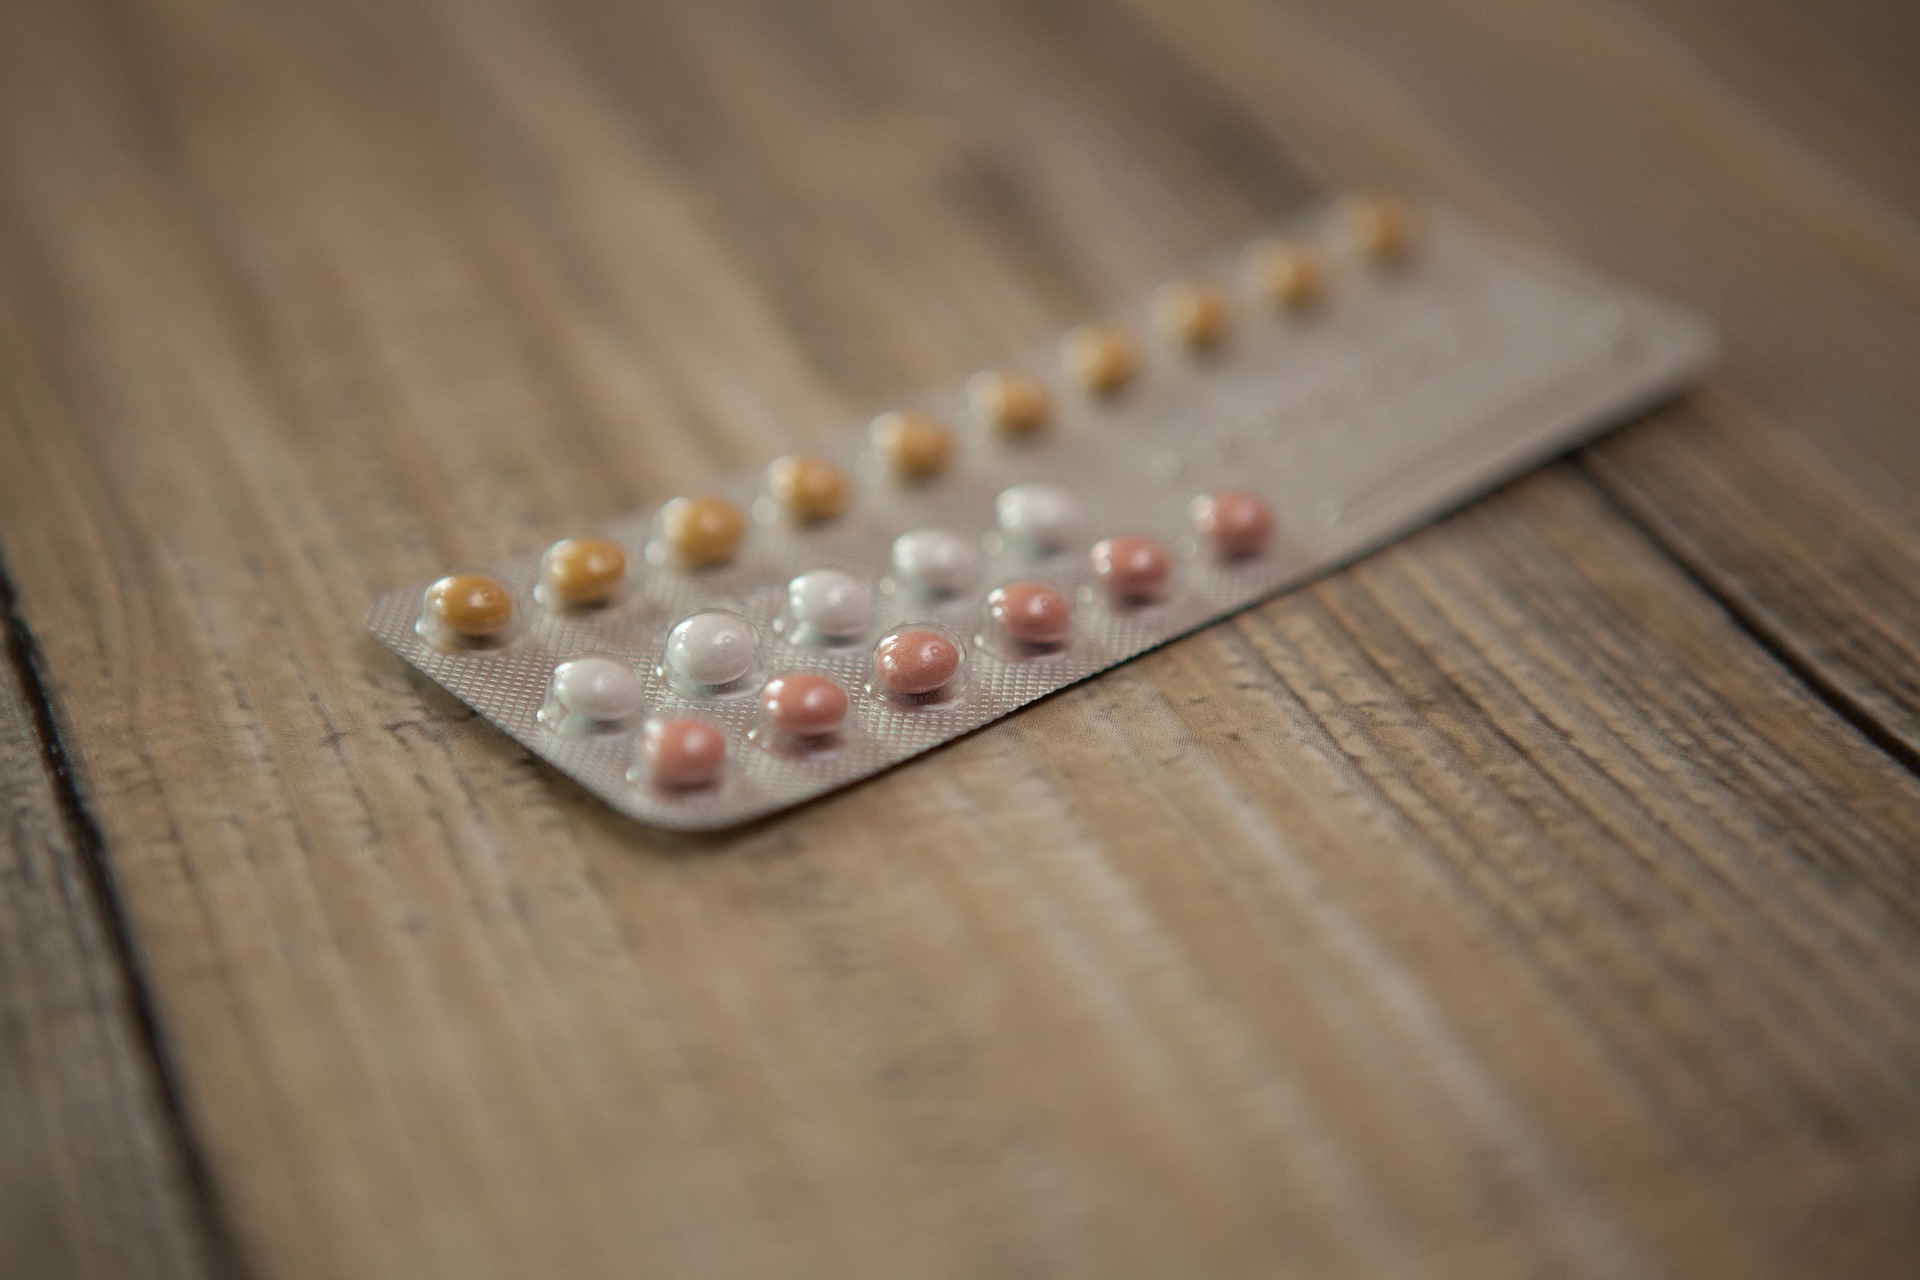 9 Common Birth Control Pill Effects To Be Aware Of